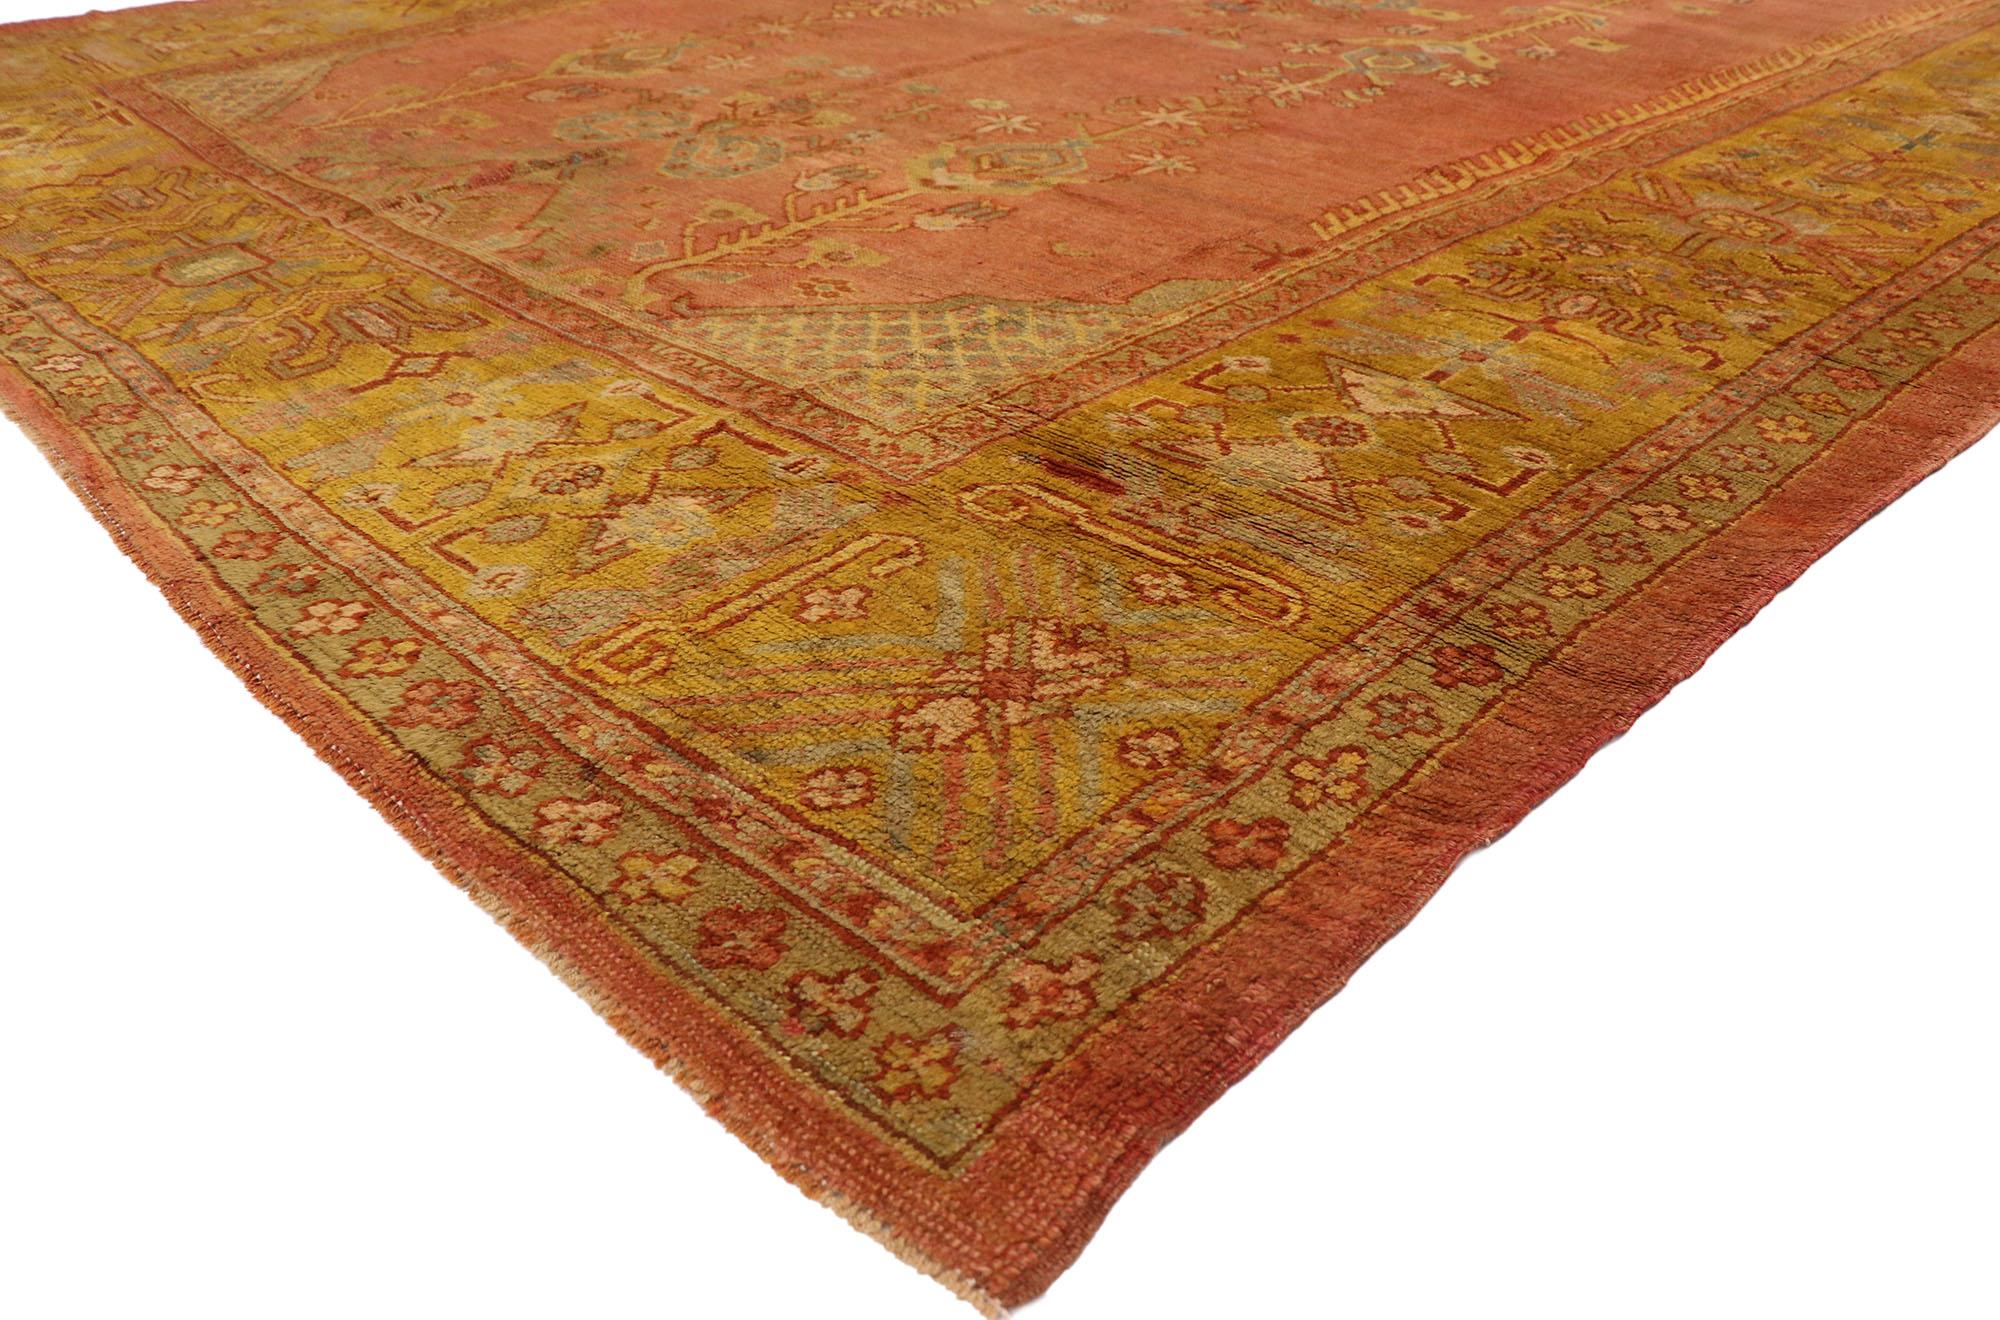 73790 antique Turkish Oushak Directional rug with Rustic Arts & Crafts style. The architectural elements of naturalistic forms and timeless elegance combined with Arts & Crafts style, this hand knotted wool antique Turkish Oushak rug astounds with